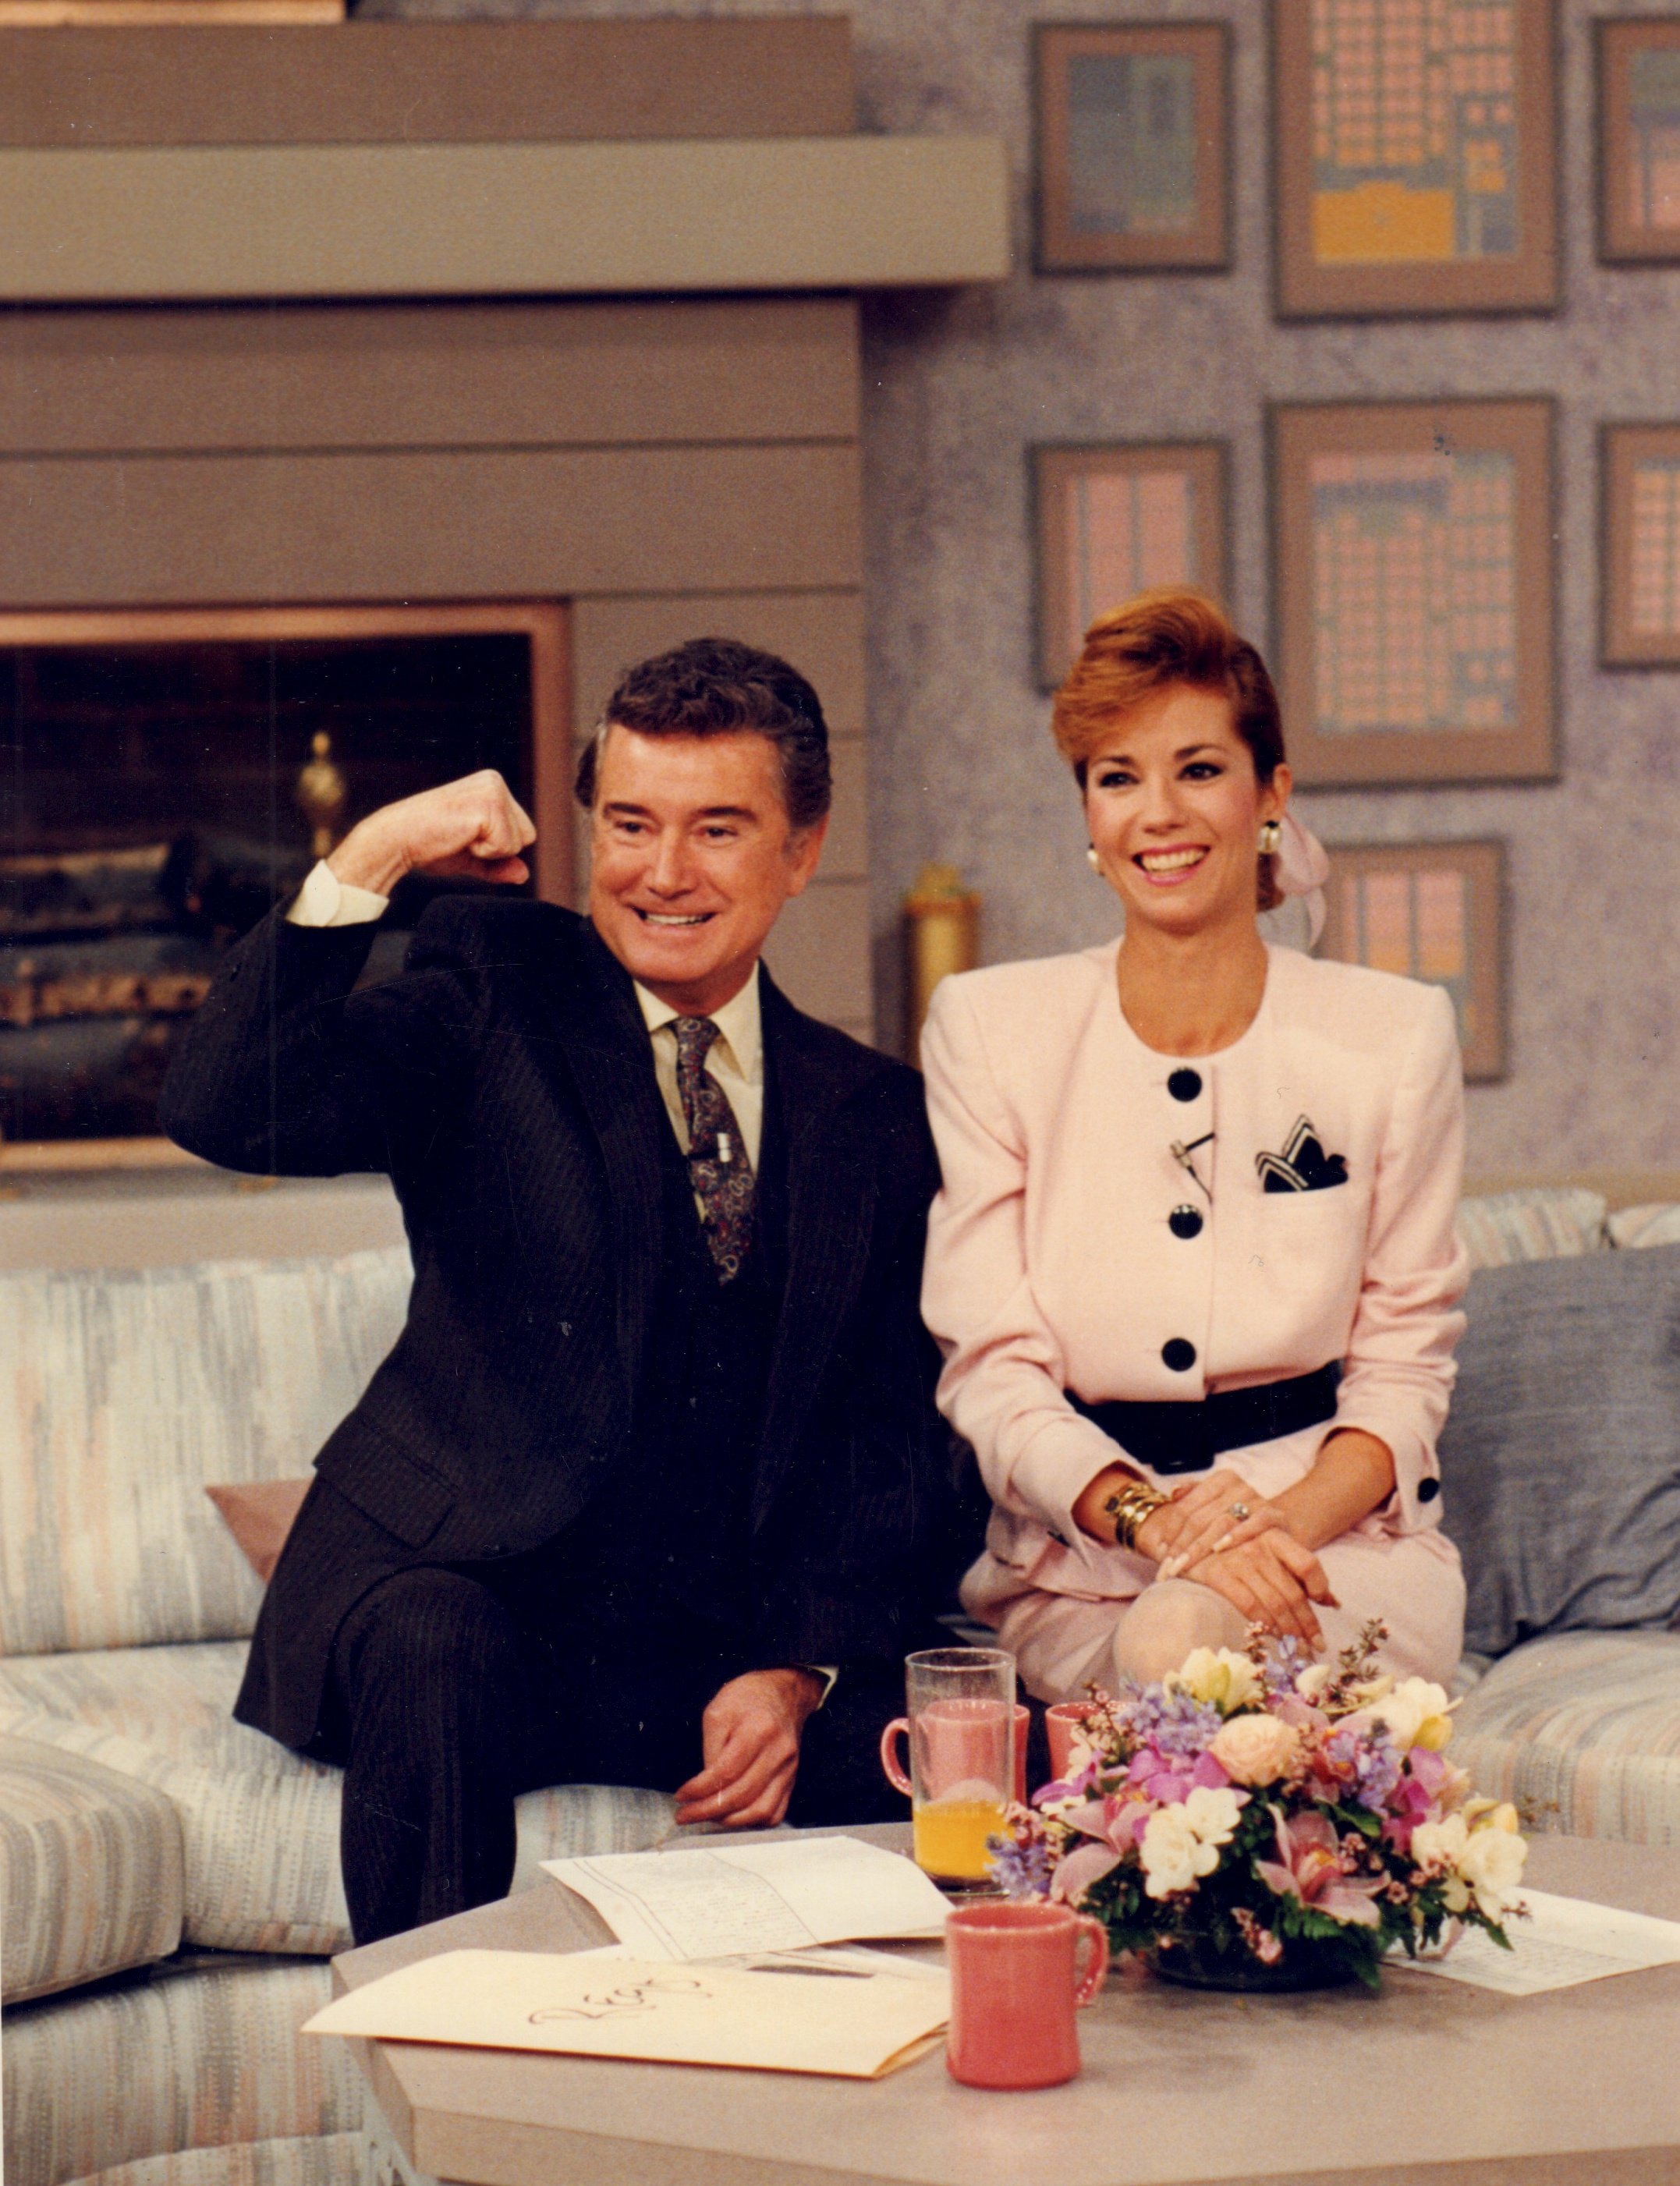  Regis Philbin and Kathie Lee Gifford on the set of "Live with Regis and Kathie Lee" in1988, New York City. | Photo: Getty Images